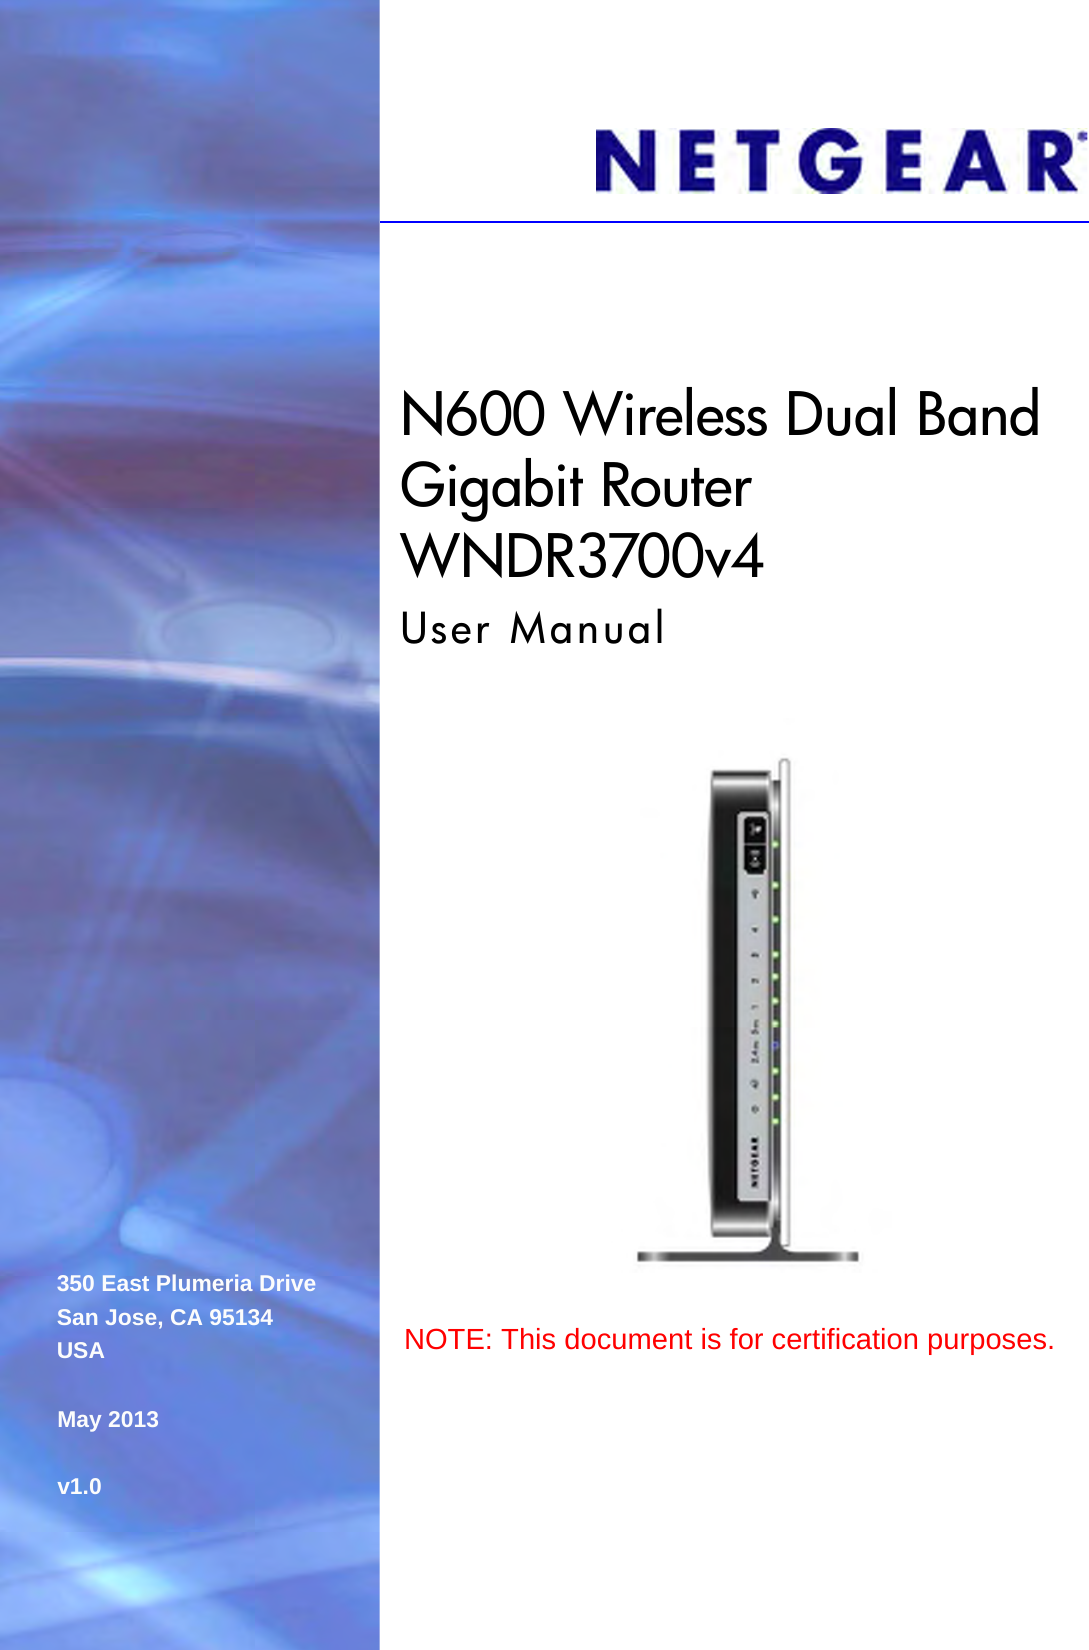 350 East Plumeria DriveSan Jose, CA 95134USAMay 2013v1.0N600 Wireless Dual Band Gigabit Router WNDR3700v4User ManualNOTE: This document is for certification purposes. 